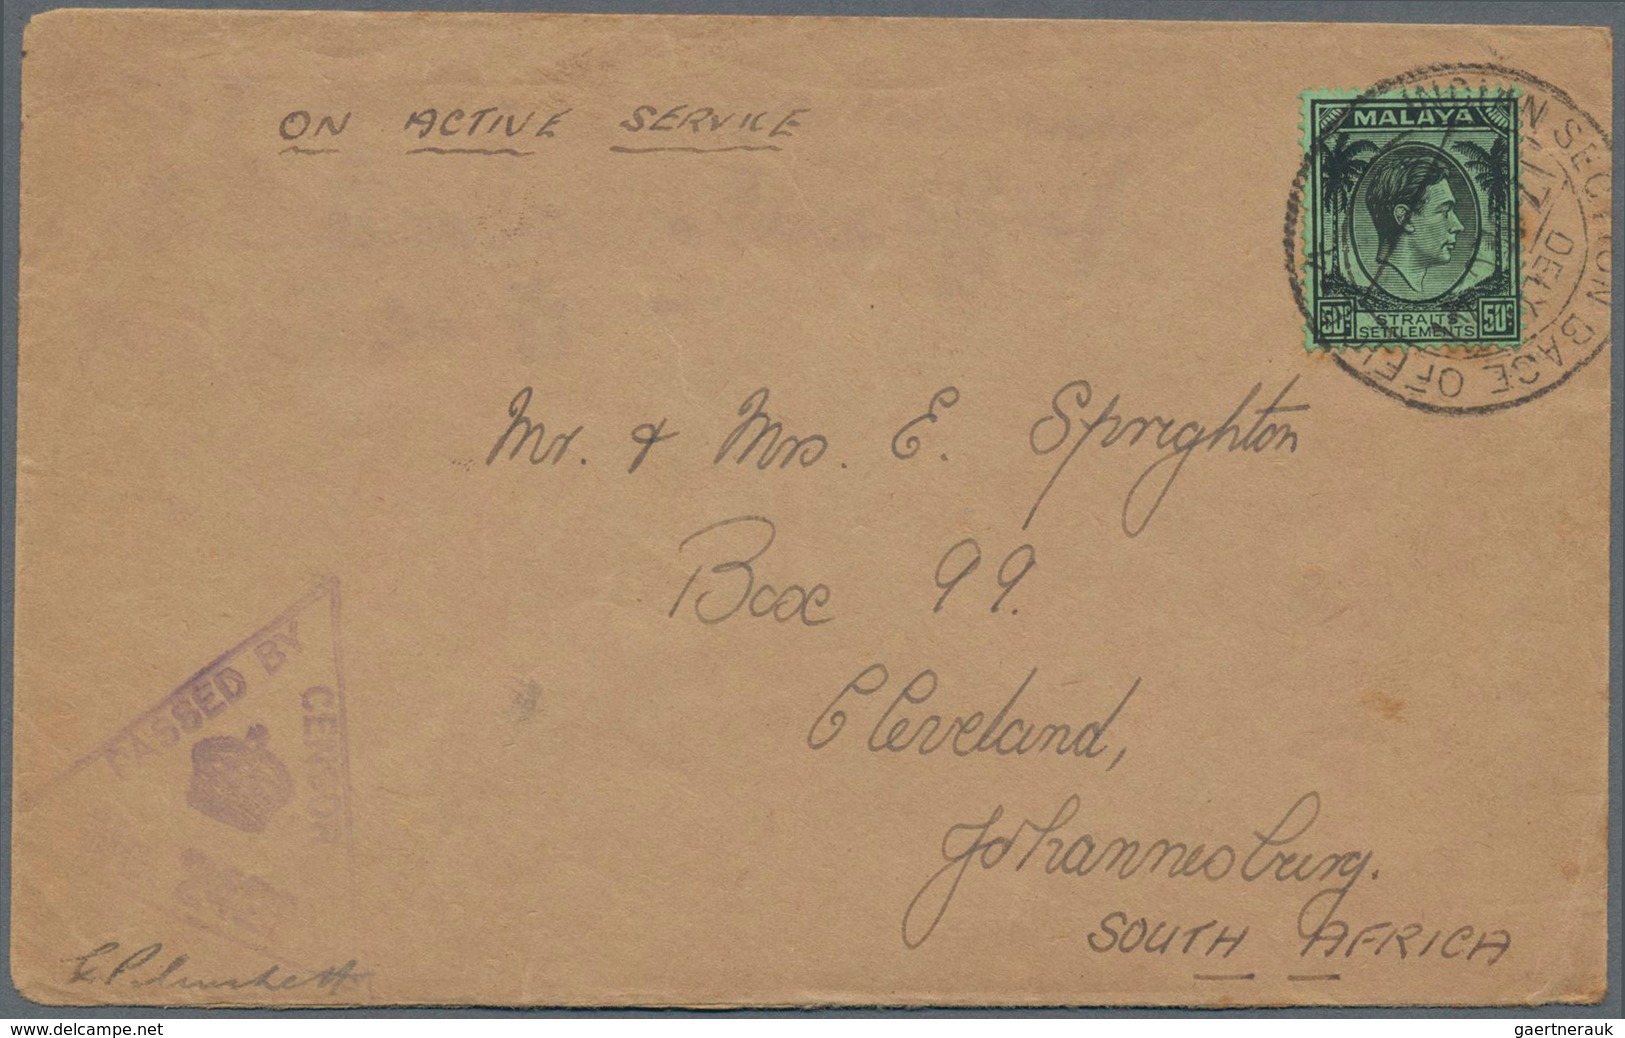 Singapur: 1941 O.A.S. Cover From Indian Base Office Singapore To Johannesburg, South Africa, Franked - Singapore (...-1959)